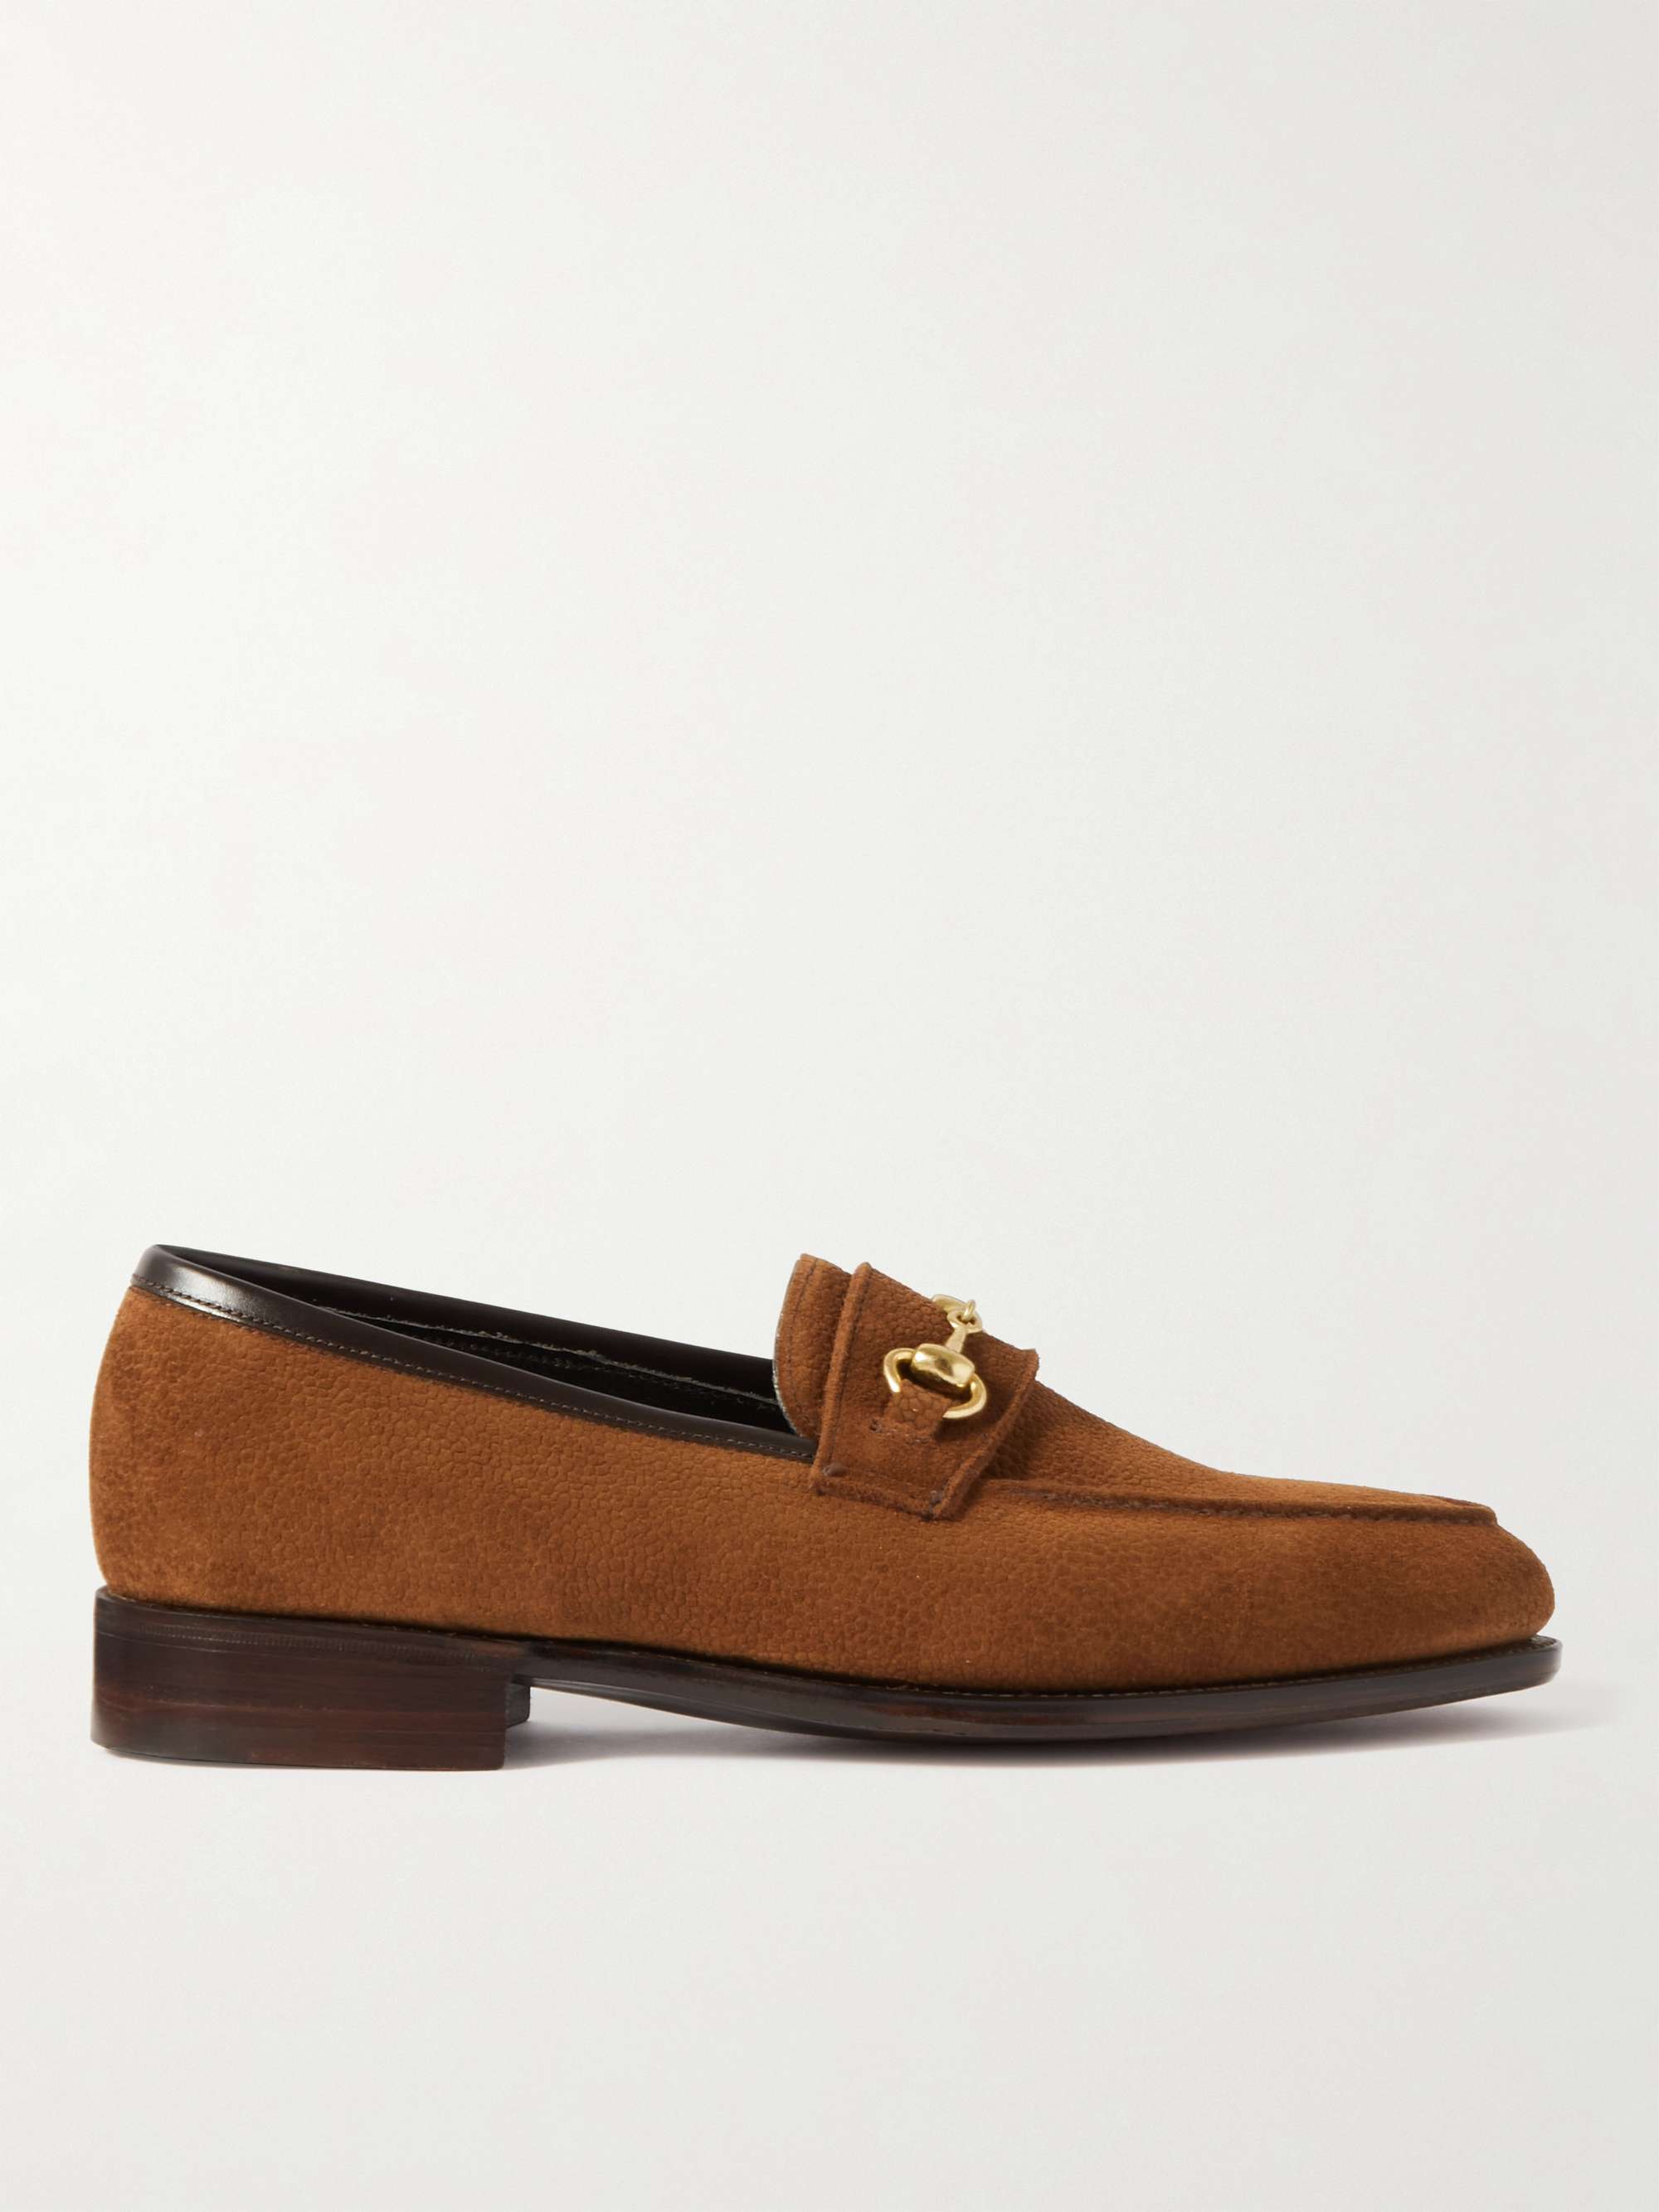 GEORGE CLEVERLEY Colony Horsebit Full-Grain Suede Loafers